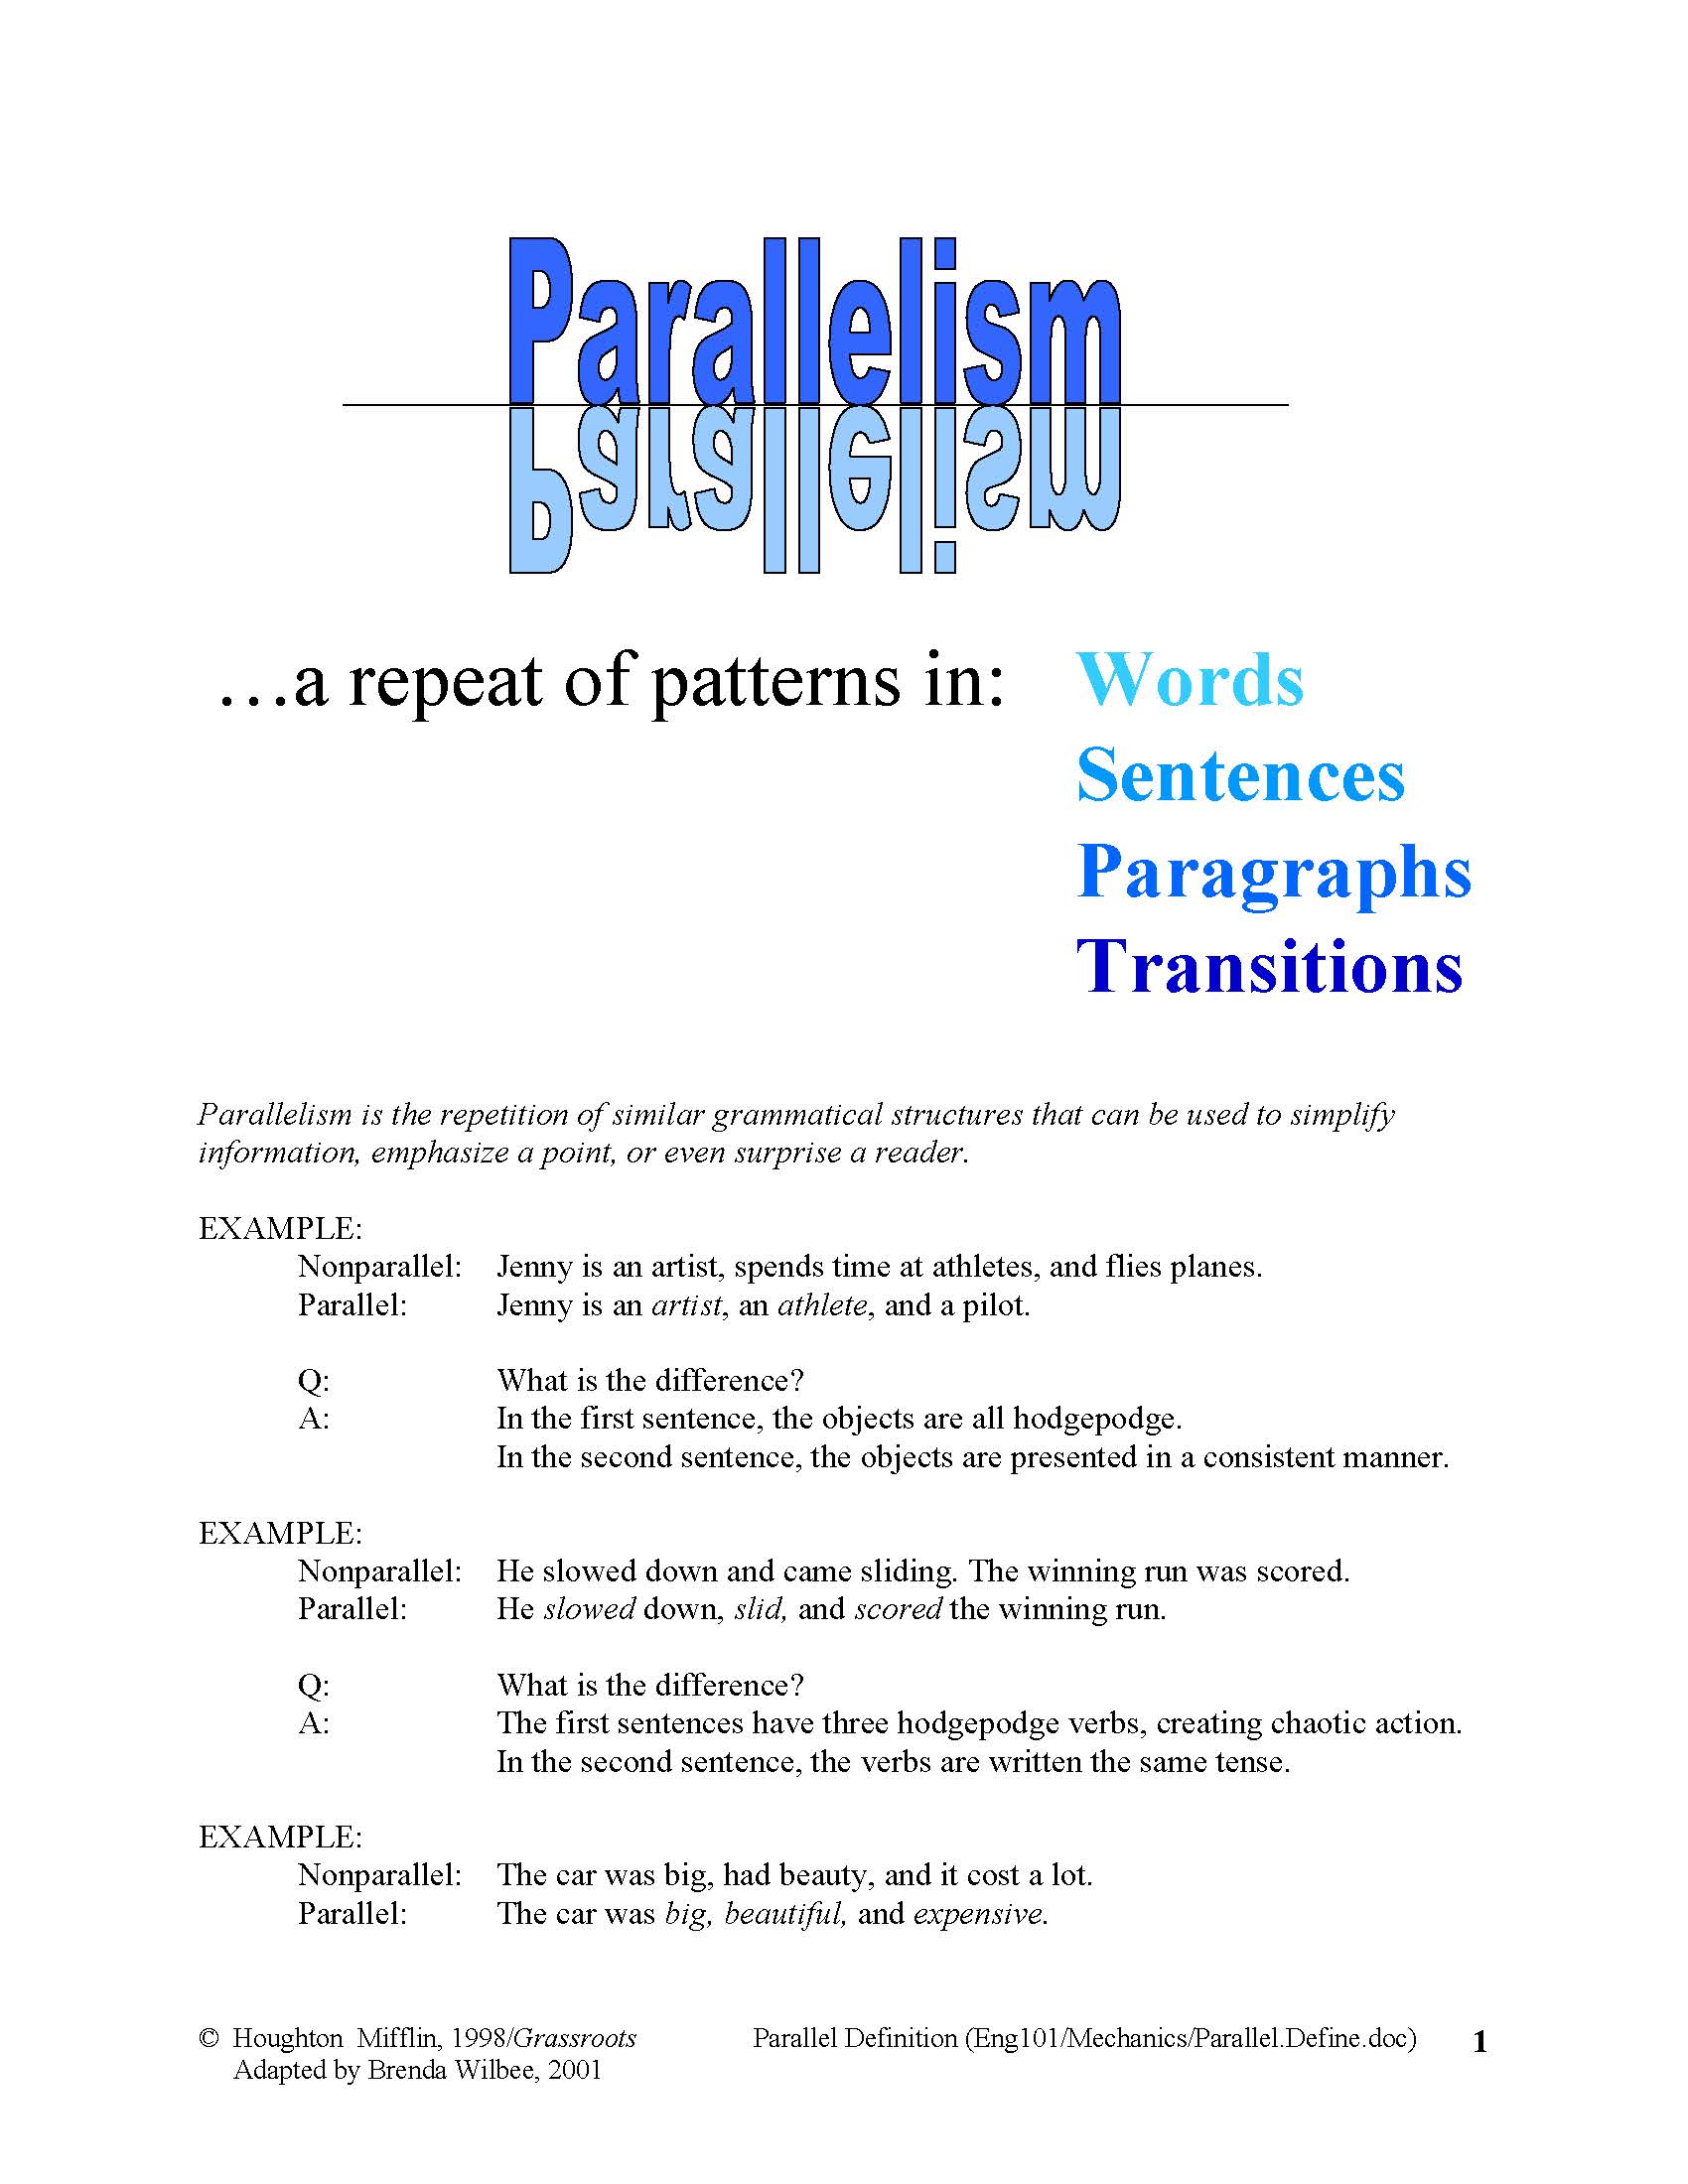 Image of Parallelism Handout